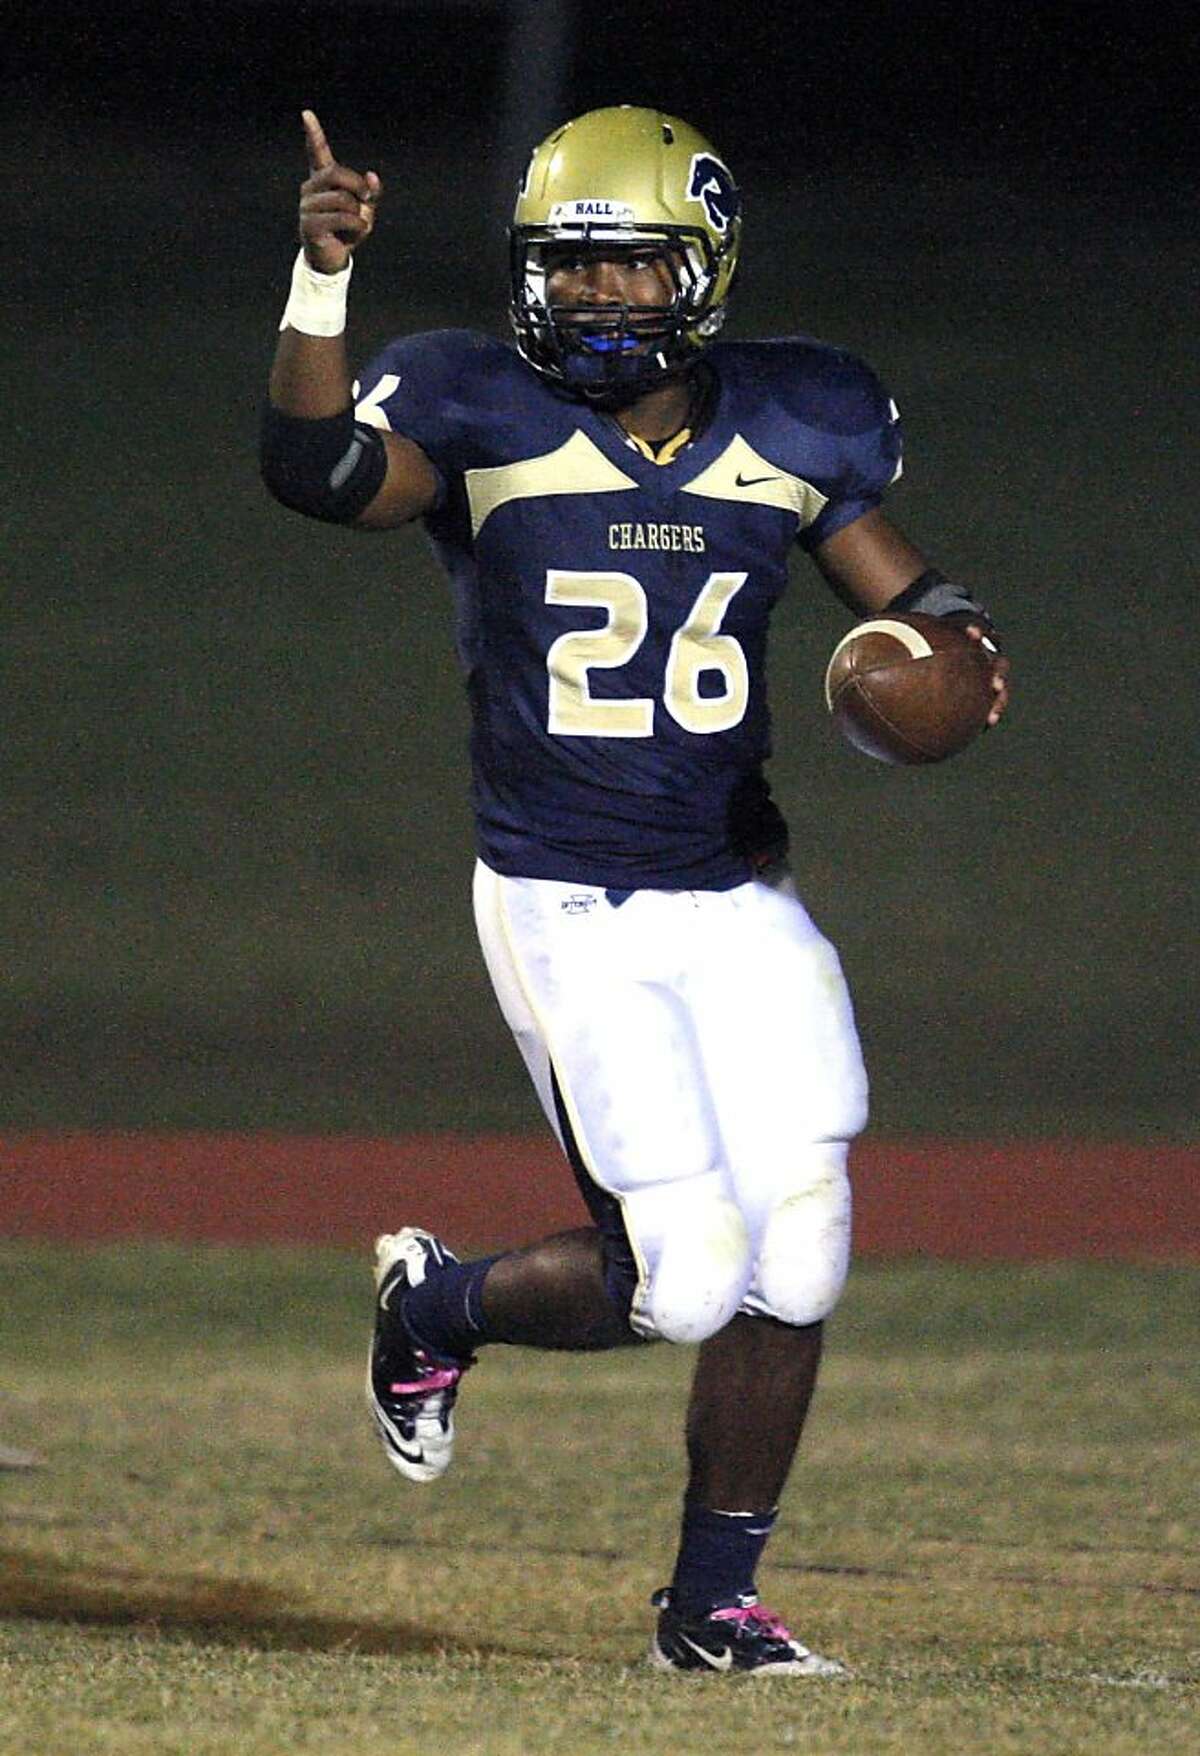 Heritage Hall's Barry J. Sanders celebrates a touchdown during the high school football game between Heritage Hall and Bethany at Heritage Hall in Oklahoma City, Friday, Oct. 28, 2011. Photo by Sarah Phipps, The Oklahoman